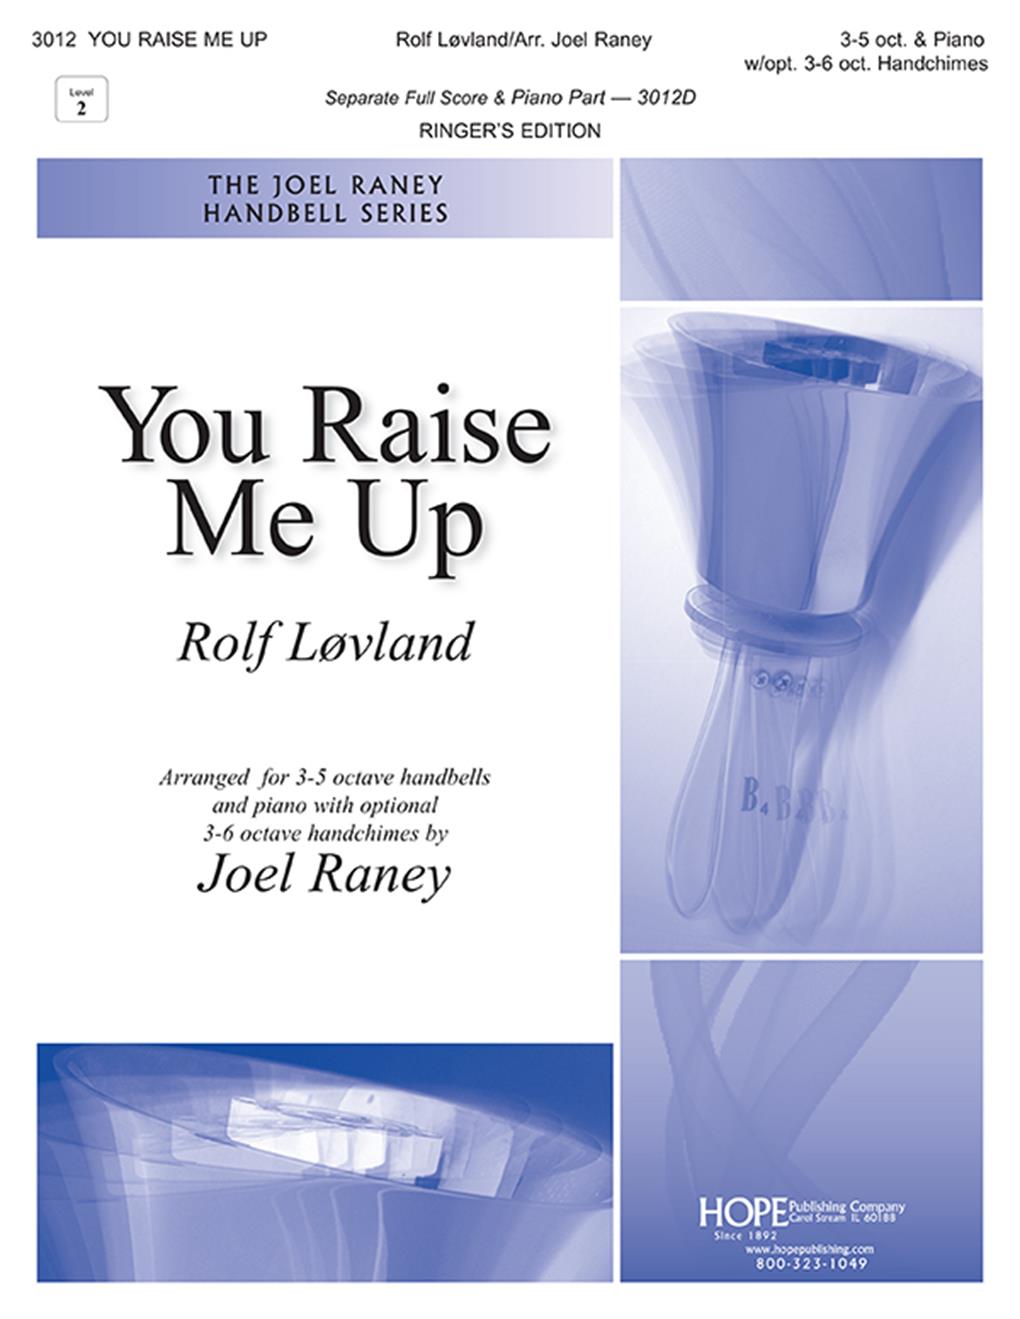 You Raise Me Up - 3-5 Oct. Cover Image